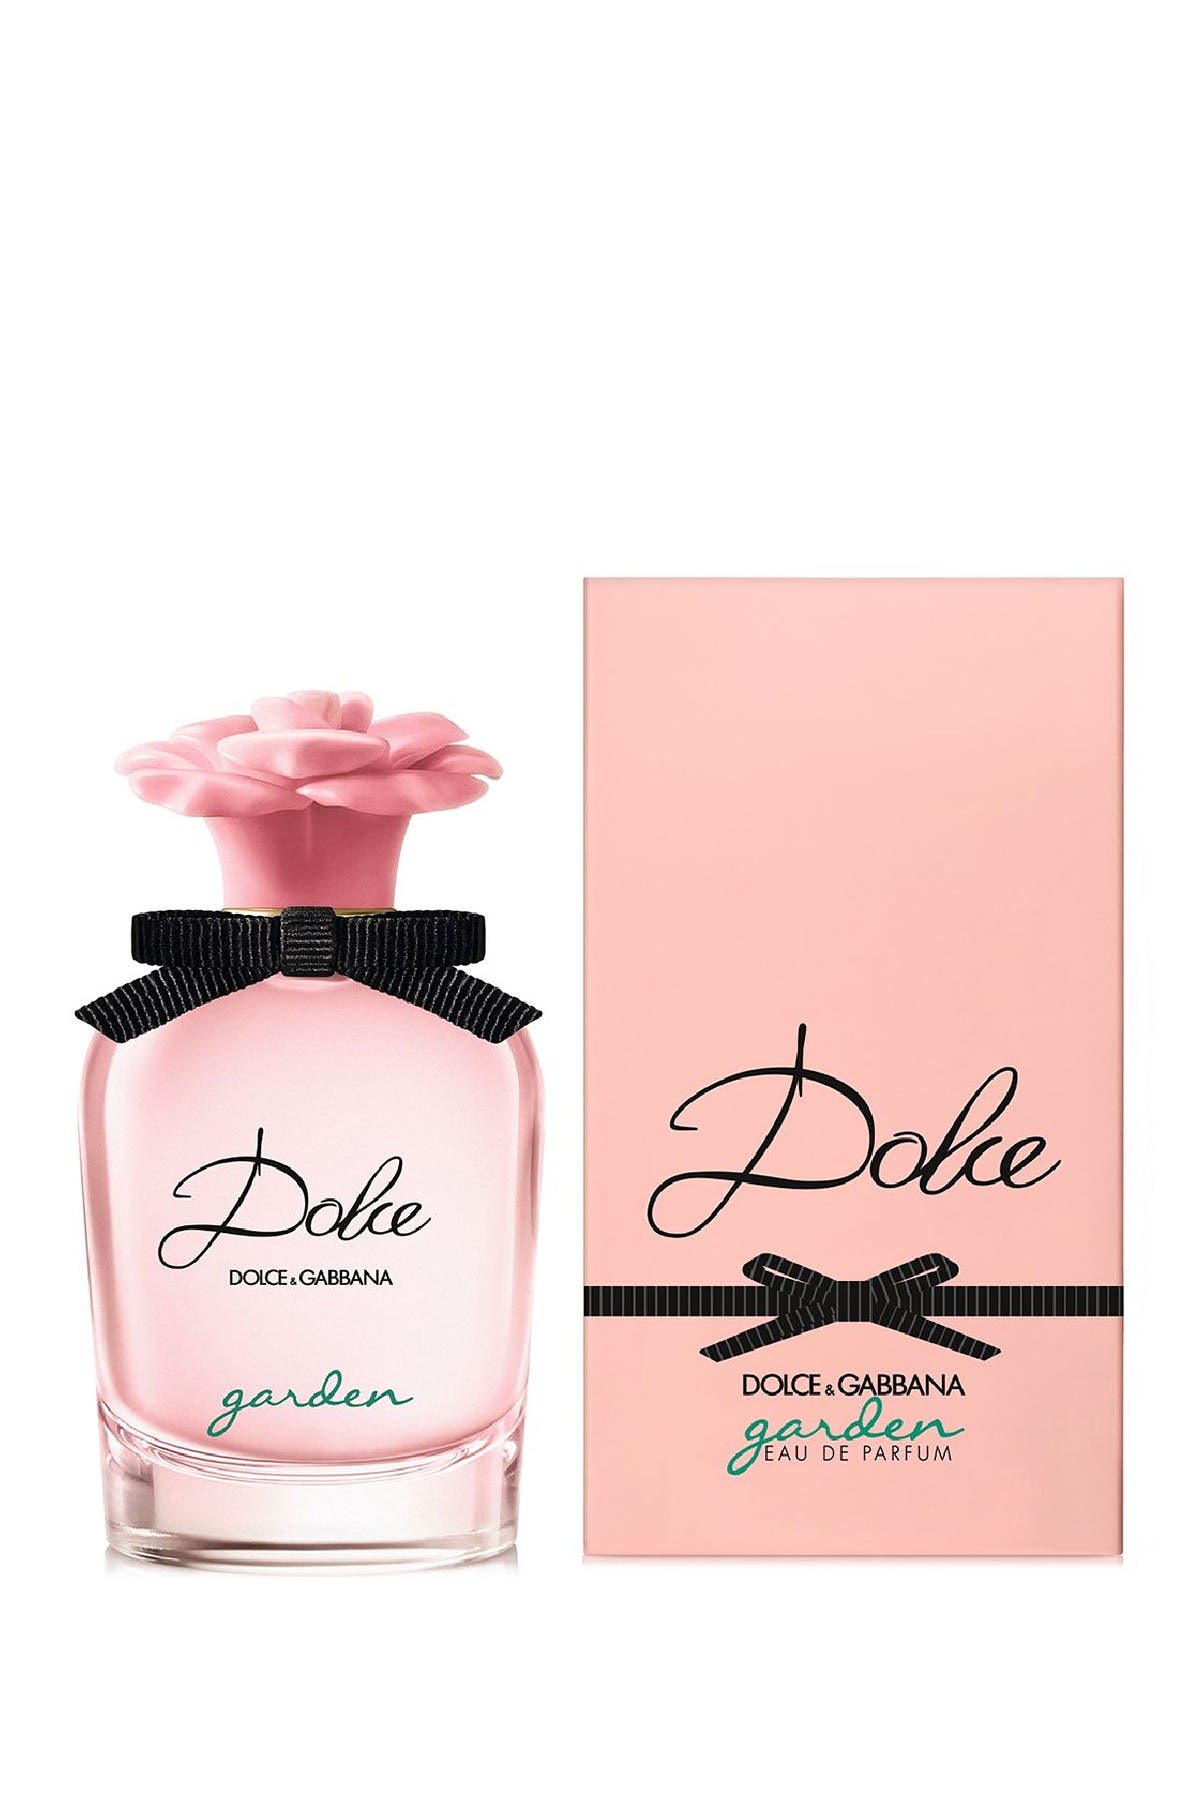 nordstrom dolce and gabbana